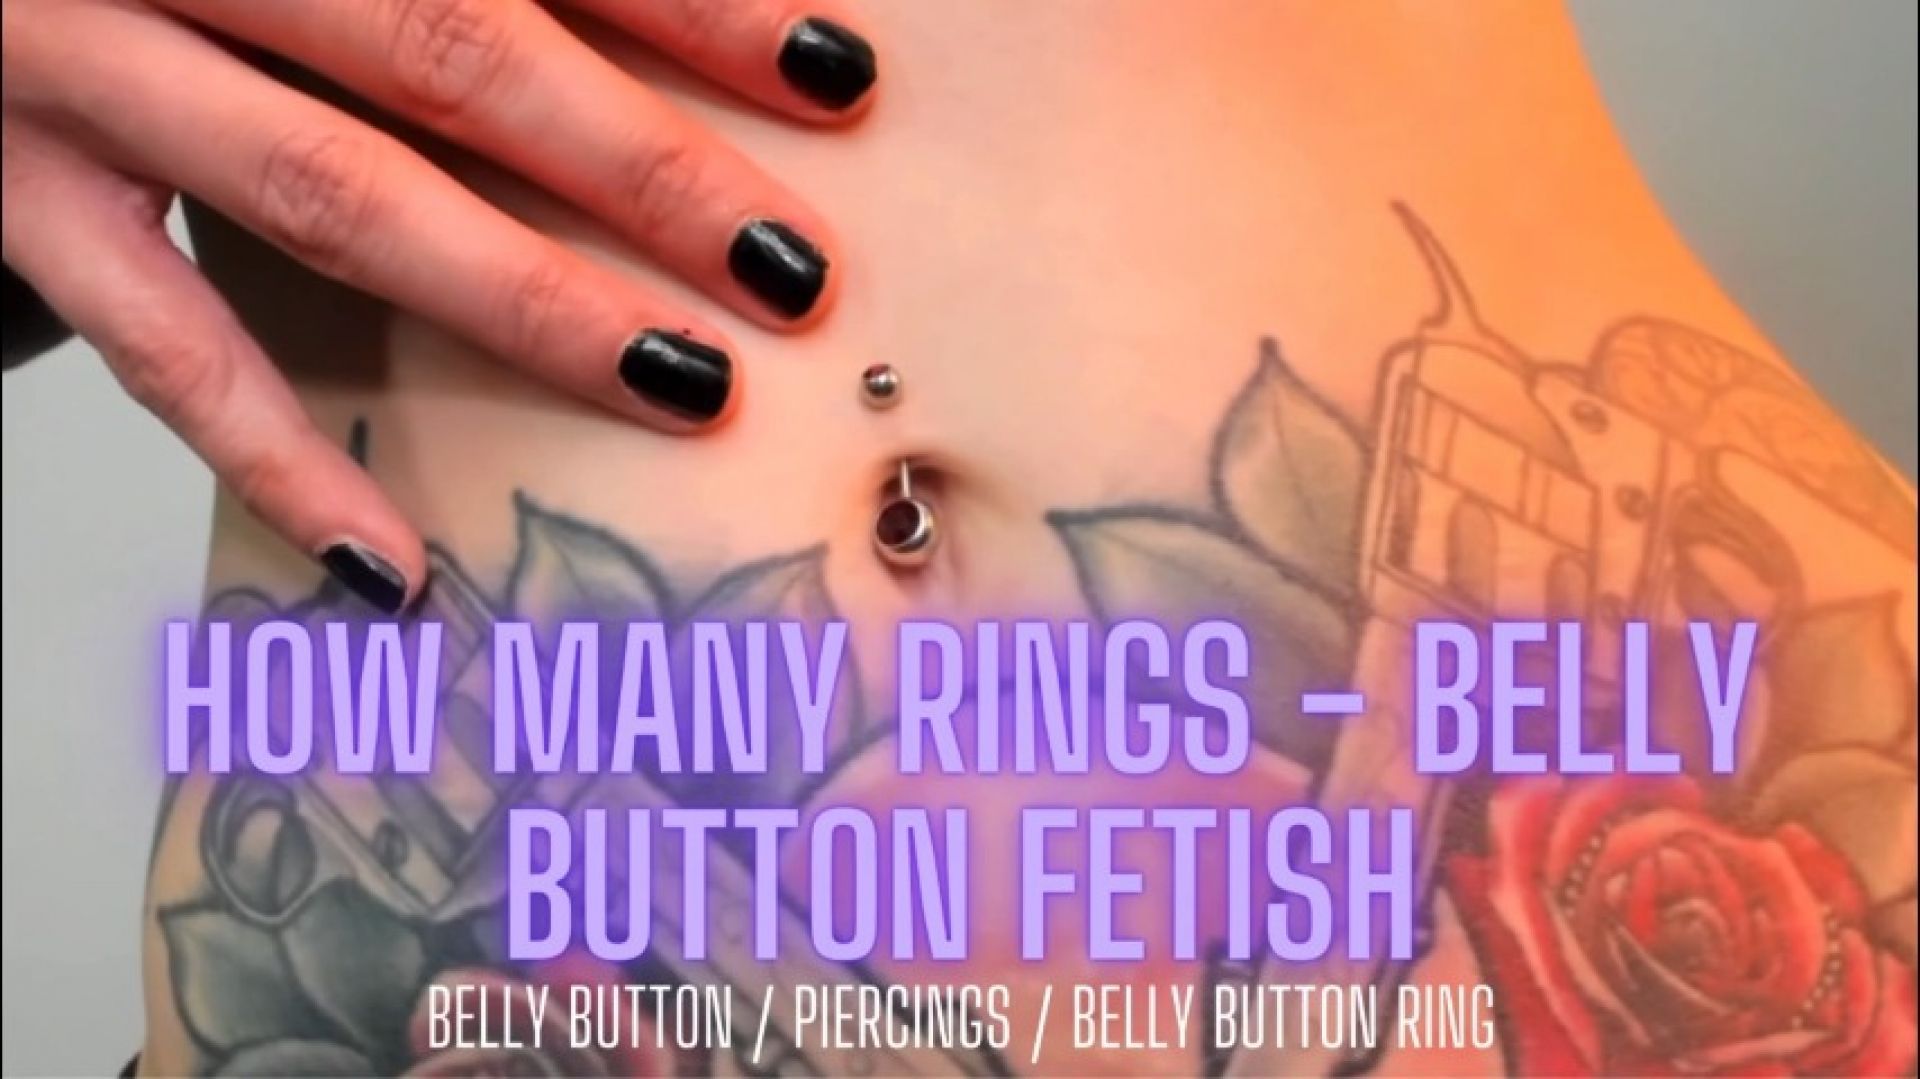 How Many Rings - Belly Button Fetish